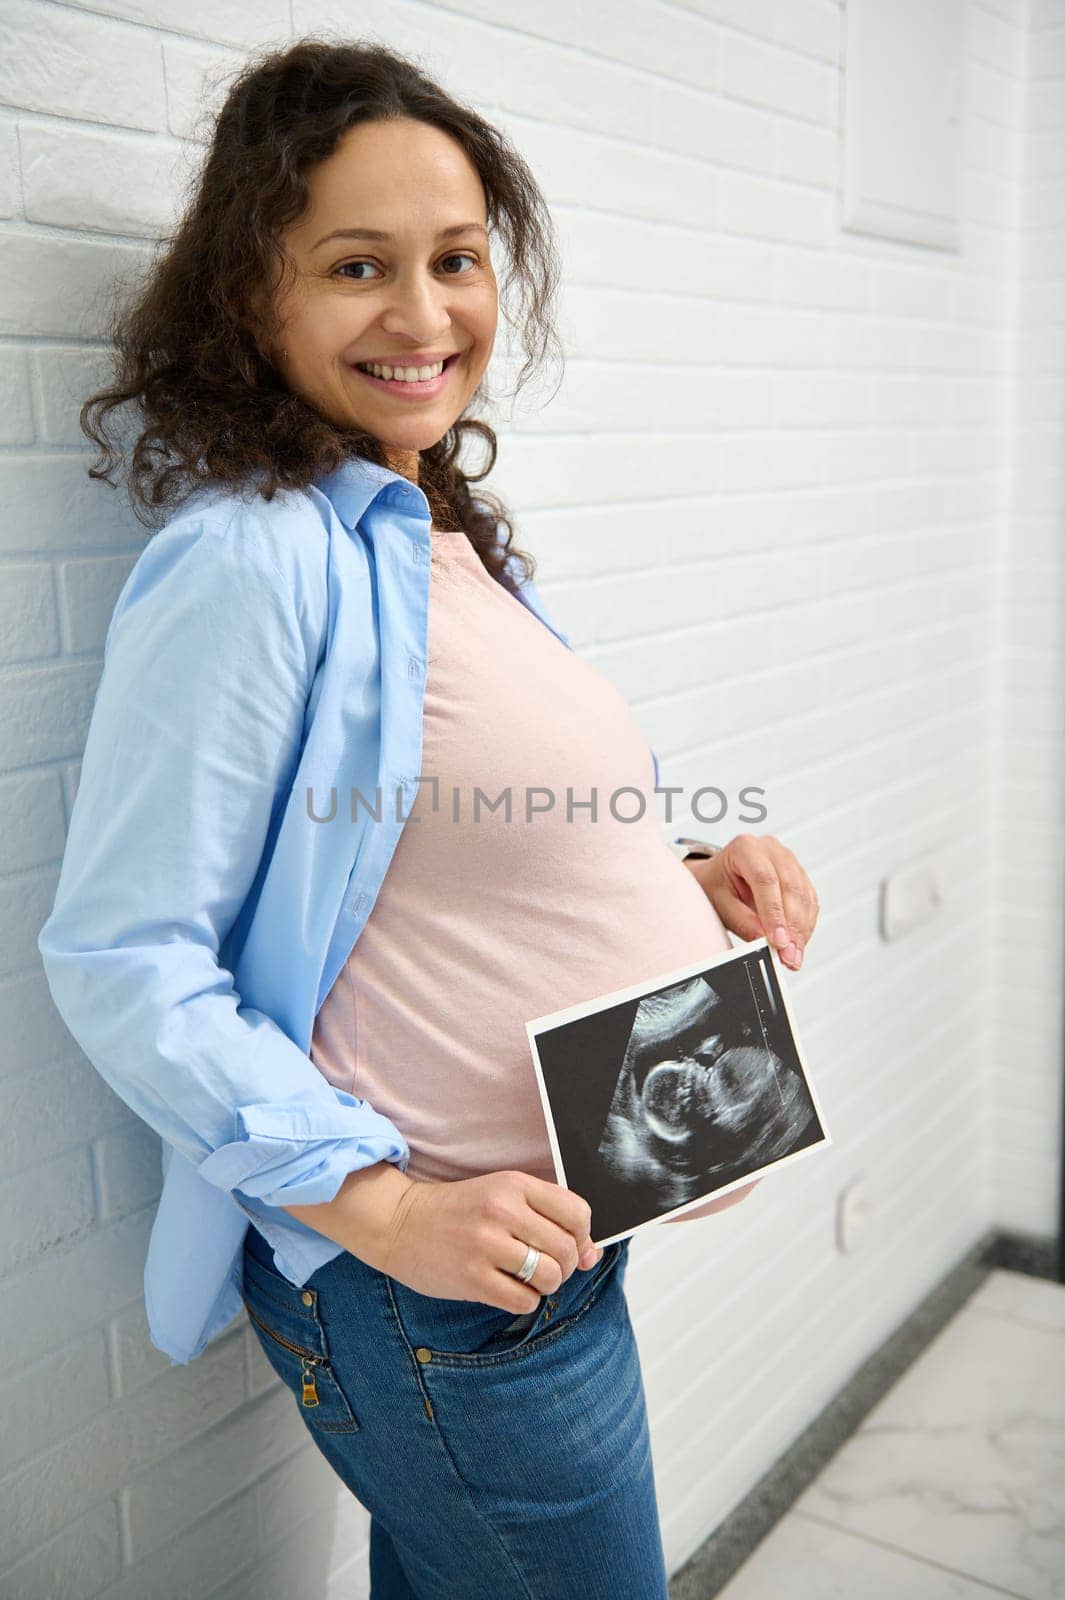 Happy pregnant woman holding ultrasound scan of her baby. Pregnancy. Obstetrics and gynecology concept. Health care by artgf